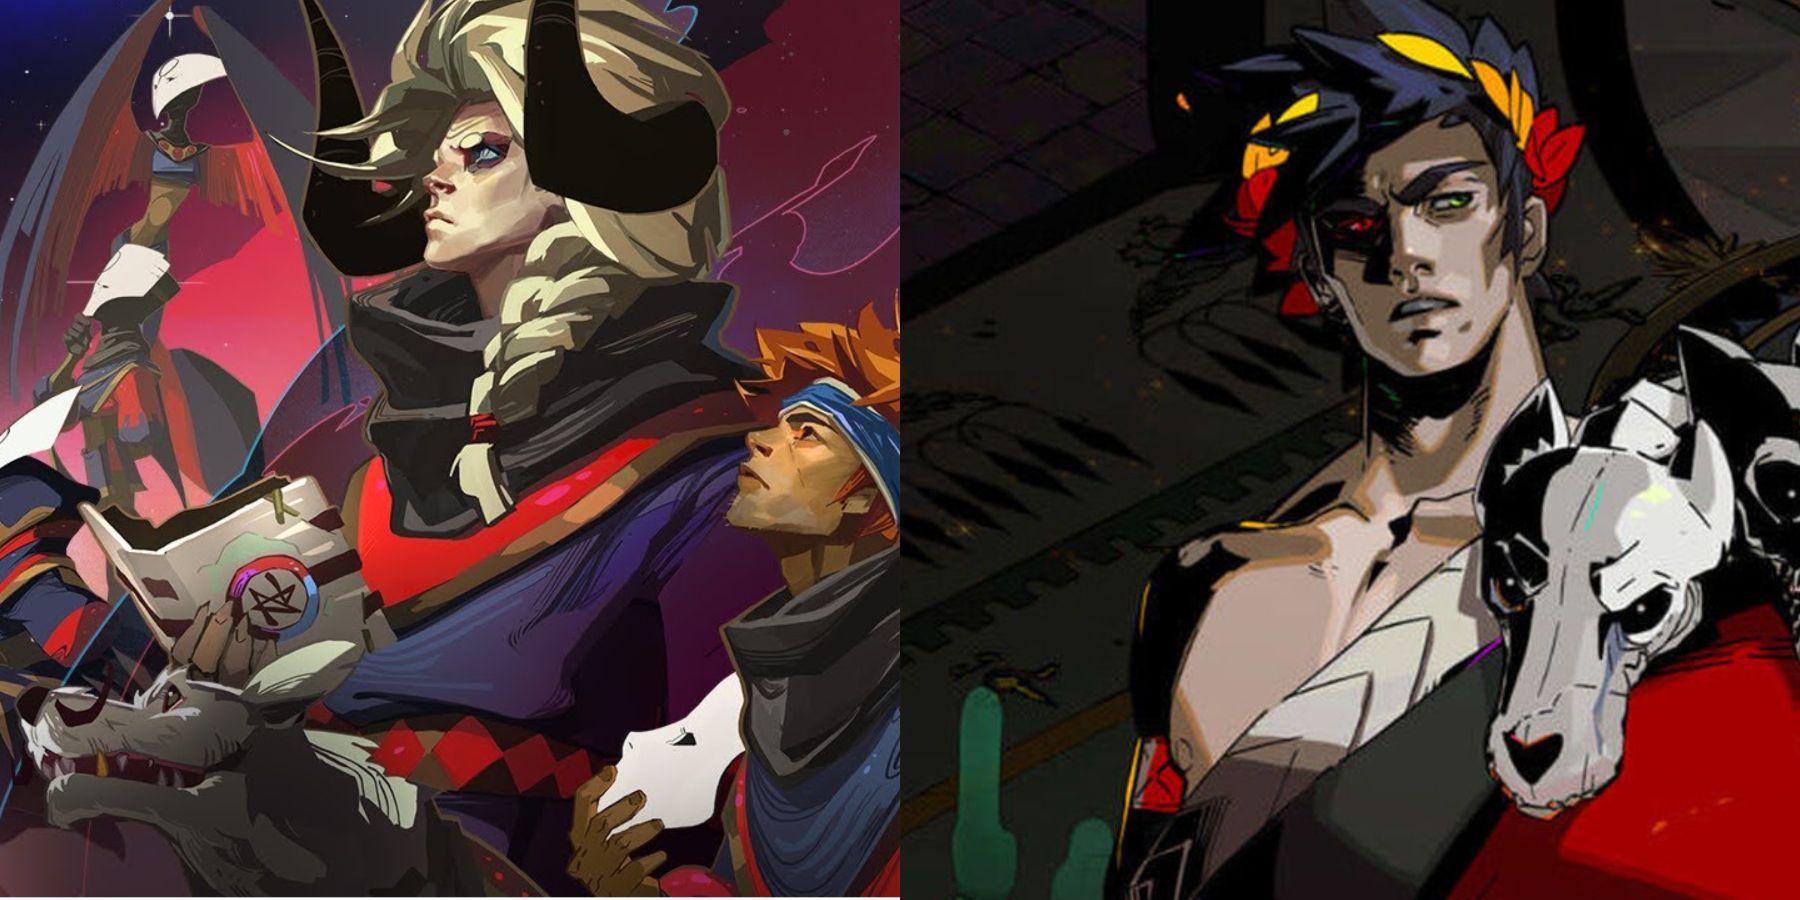 Split image of Pyre and Hades.